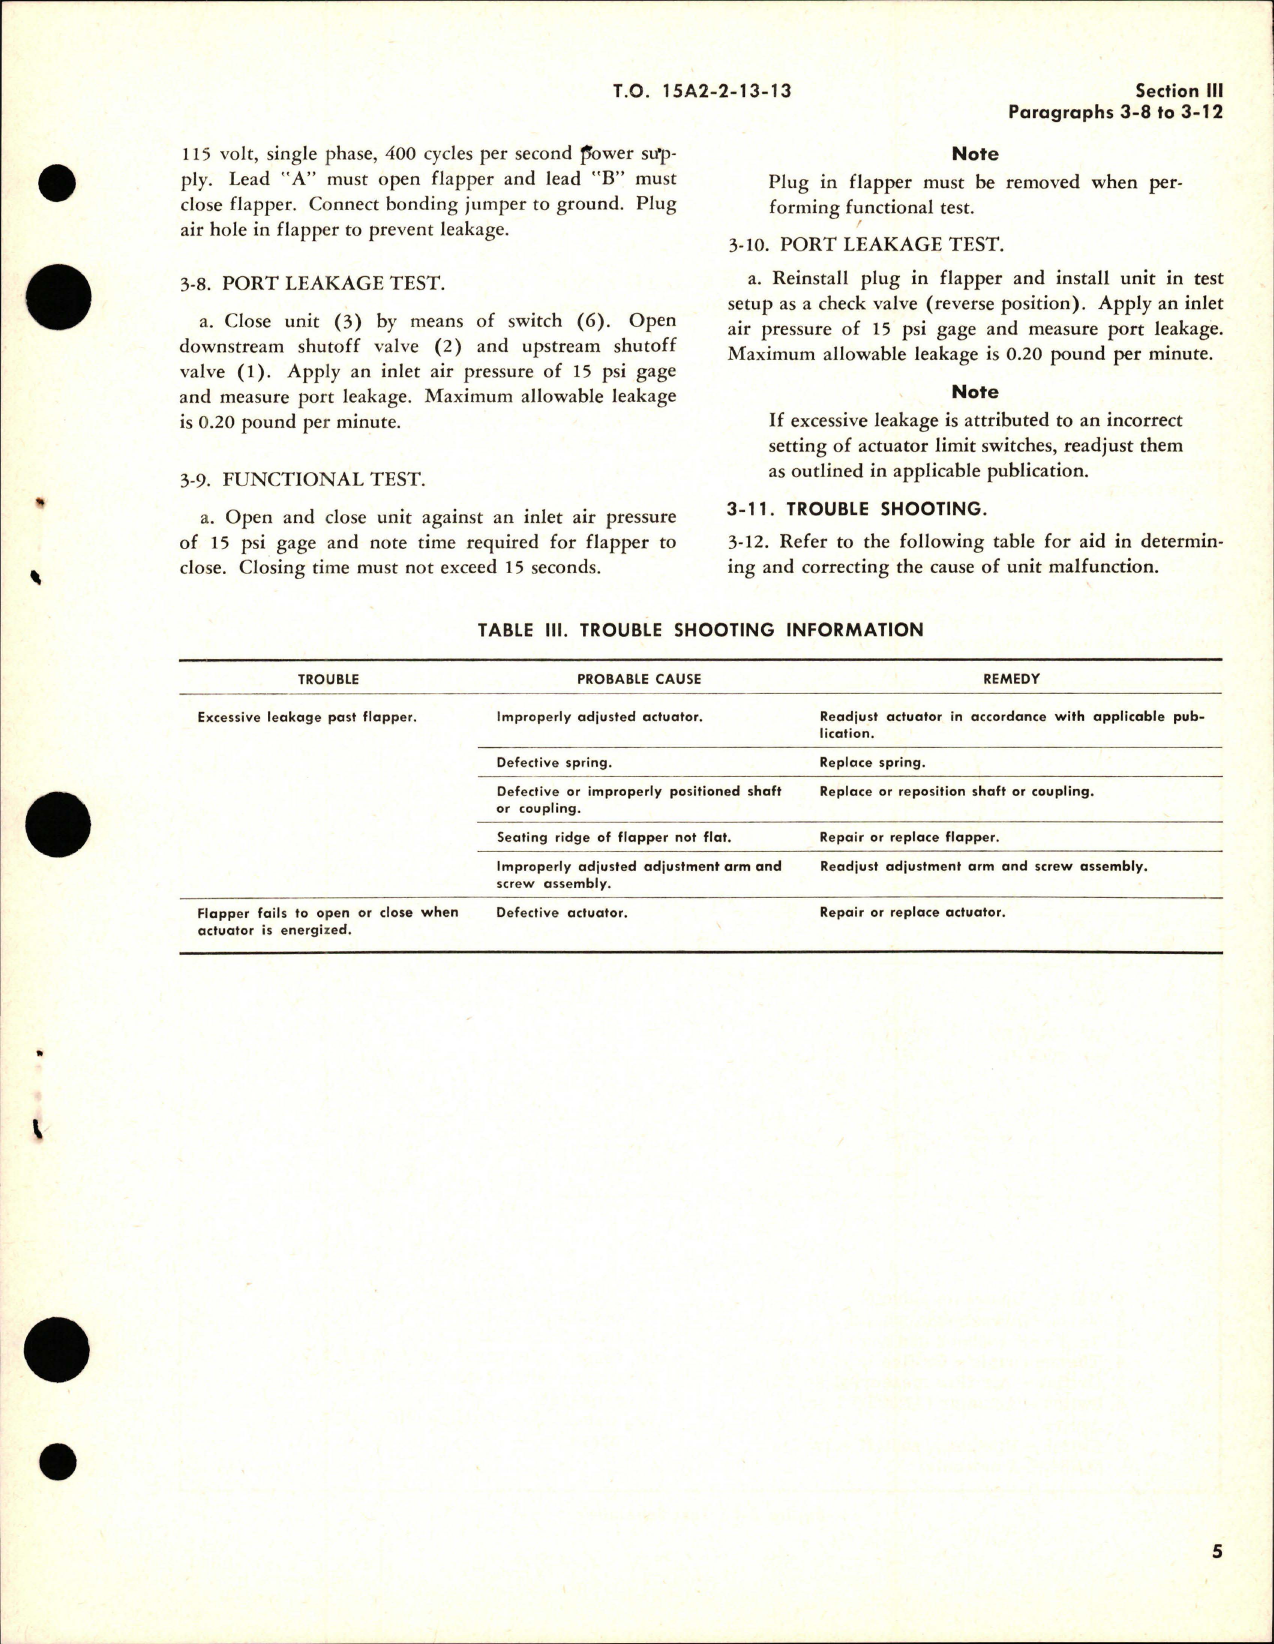 Sample page 7 from AirCorps Library document: Overhaul Instructions for Check and Shutoff Valves